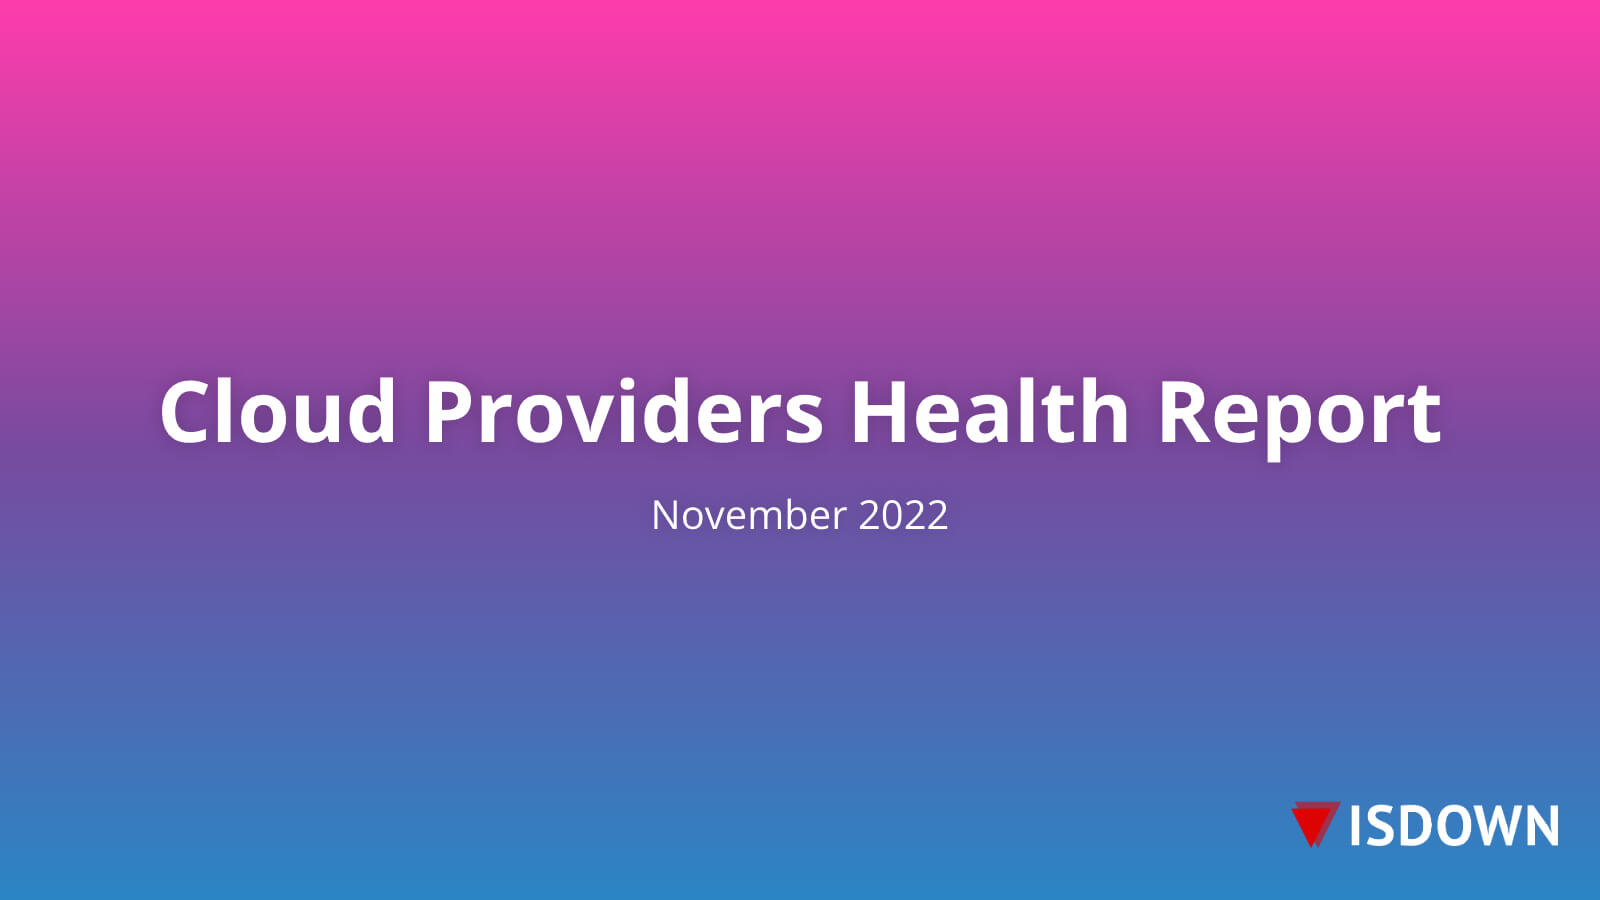 Cloud Providers Health Report - November 2022 (Ongoing)